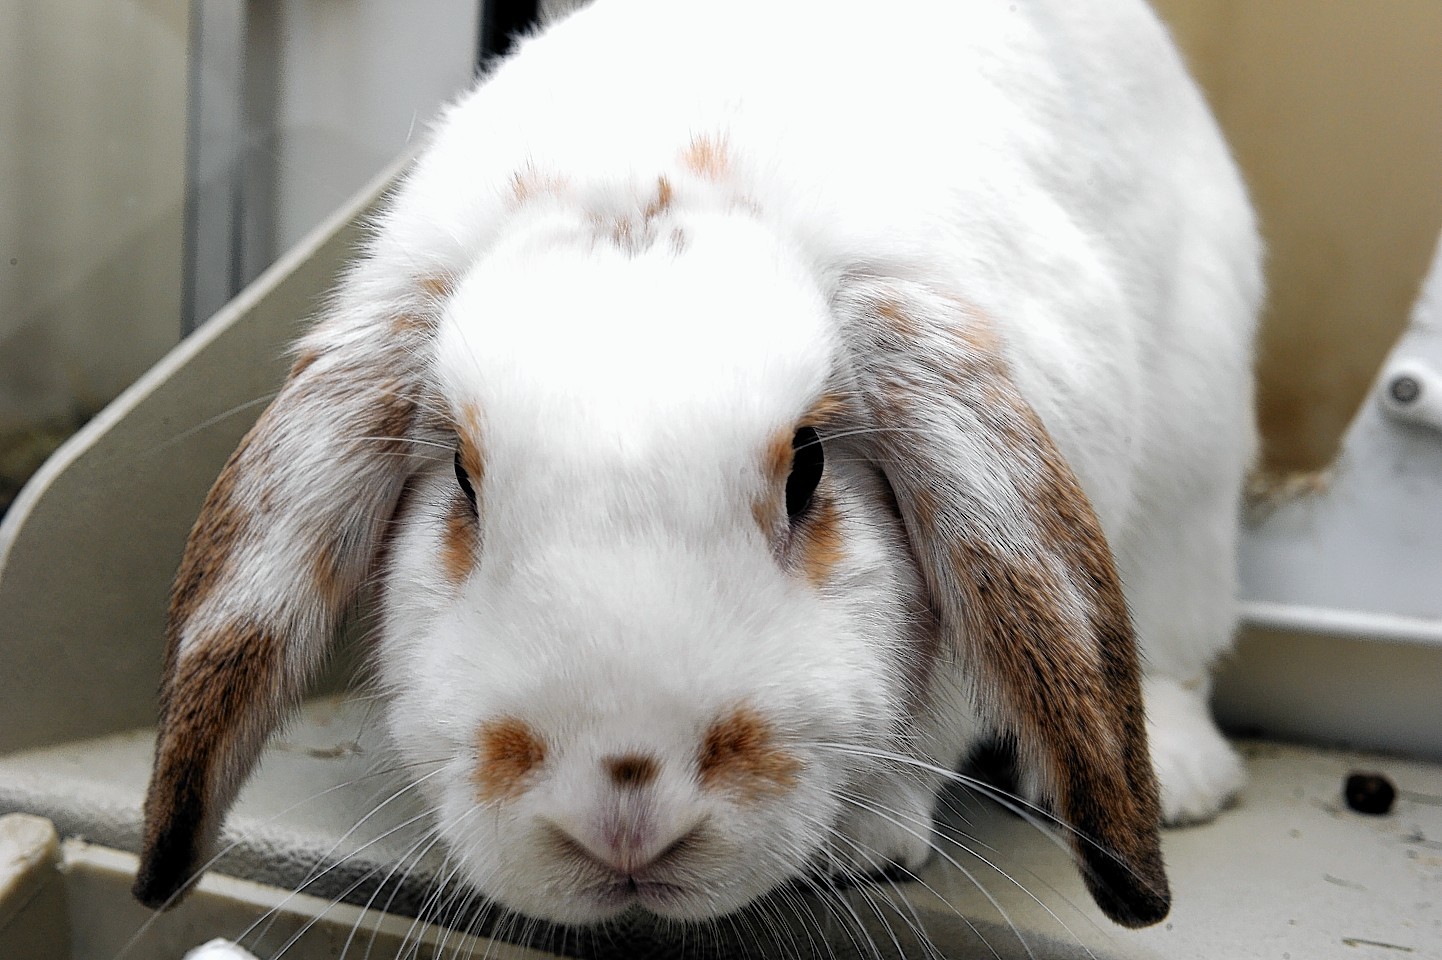 The pet rabbit is believed to have been stolen from its hutch